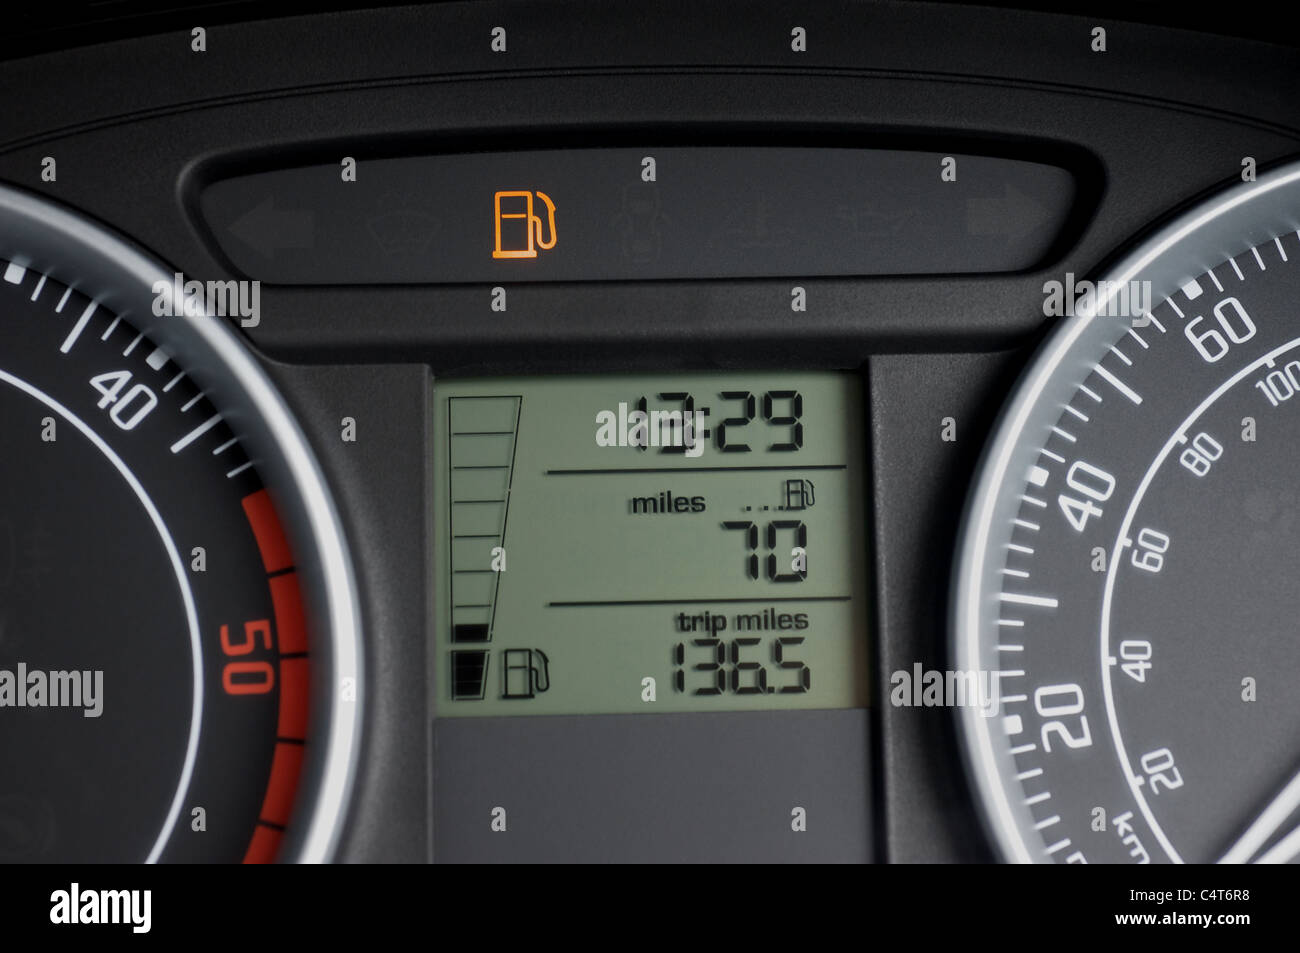 Car dashboard showing low fuel warning light Stock Photo